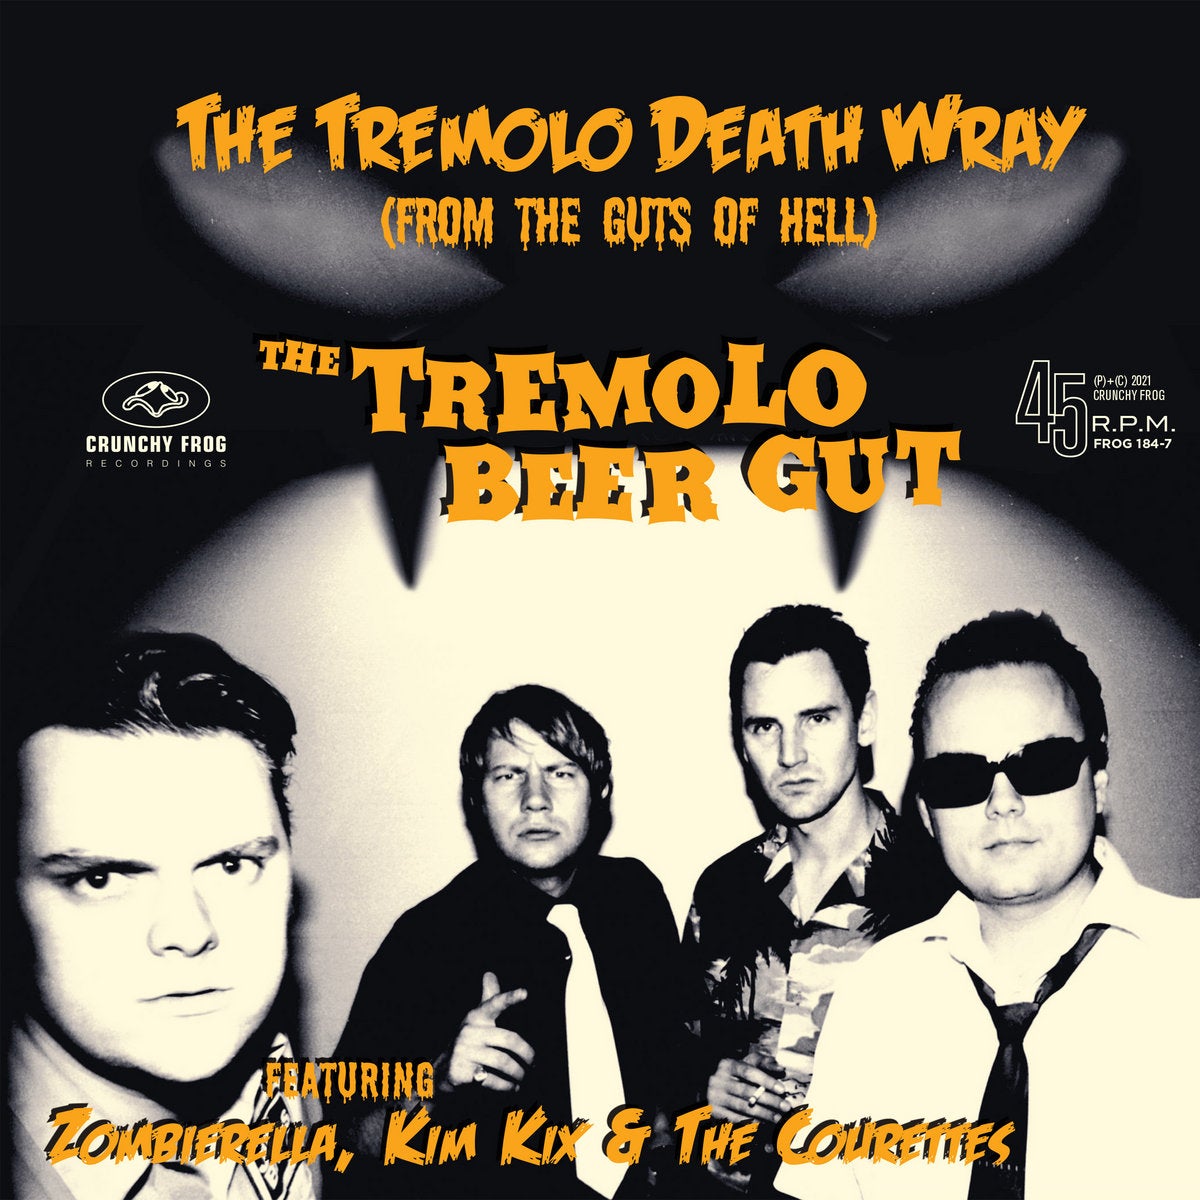 X-mas Date at The Snow Club b/w The Tremolo Death Wray (From The Guts Of Hell)